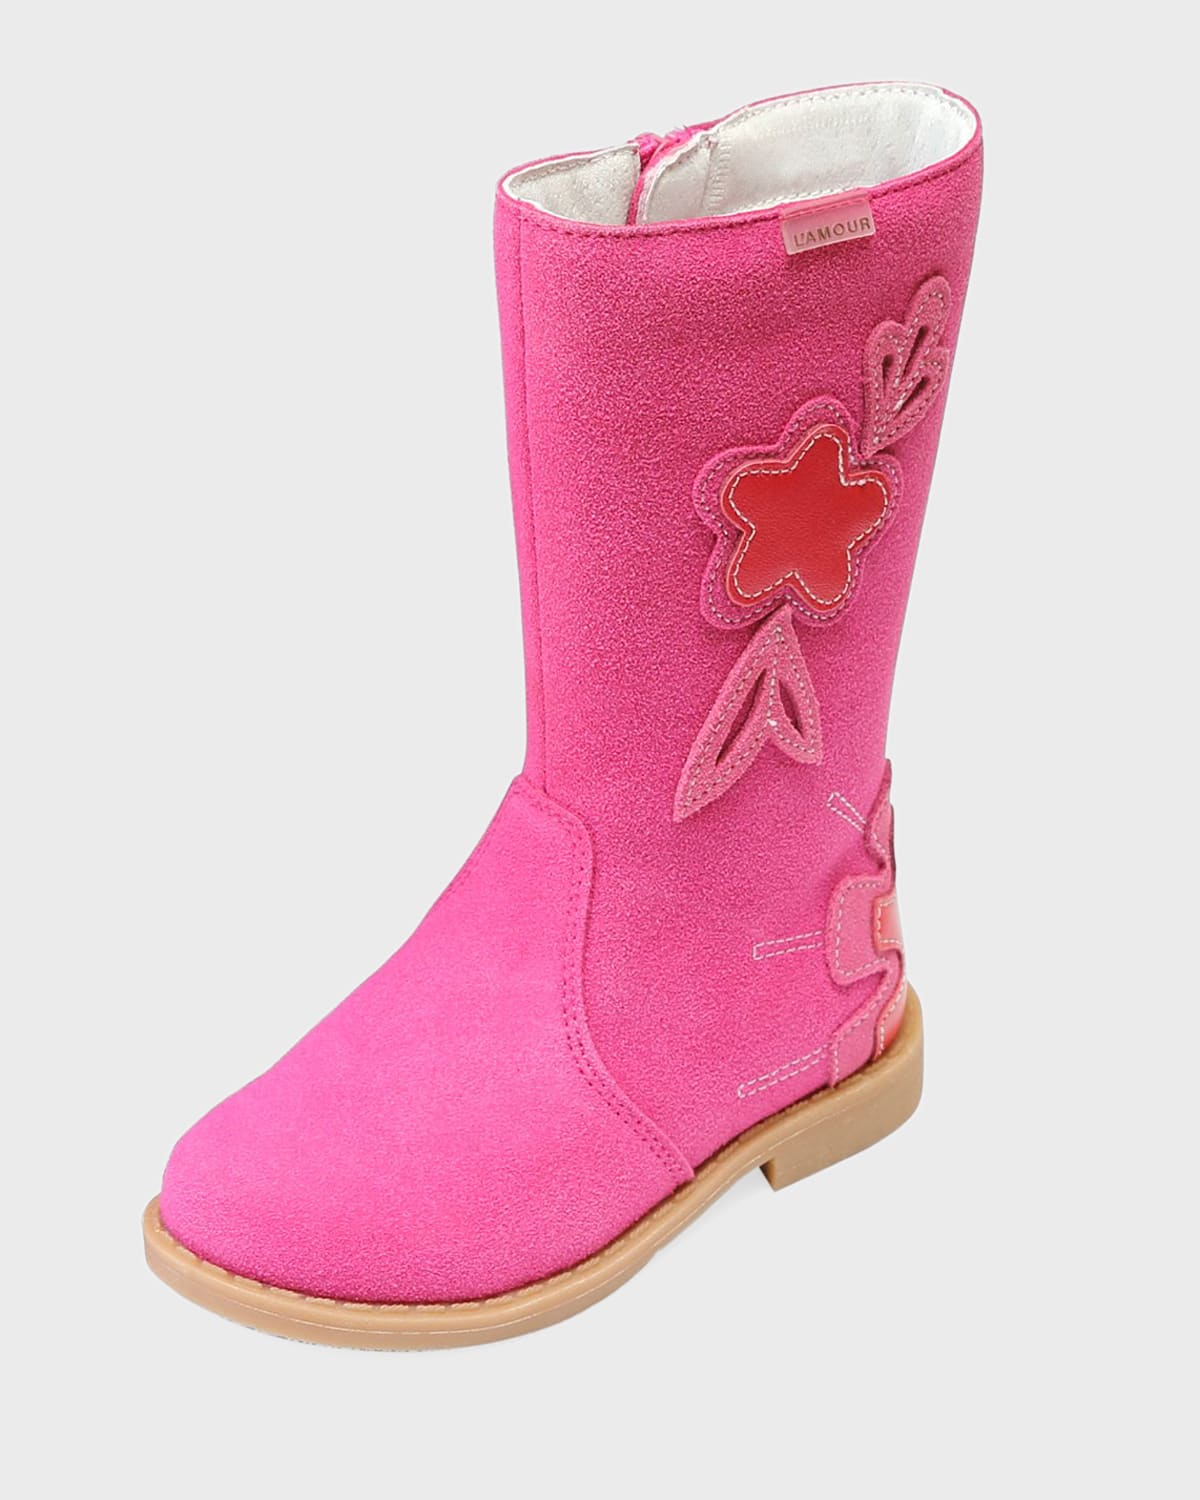 L'amour Shoes Fiore Tall Fashion Boot W/ Stitch Flowers, Baby/toddler/kids In Pink